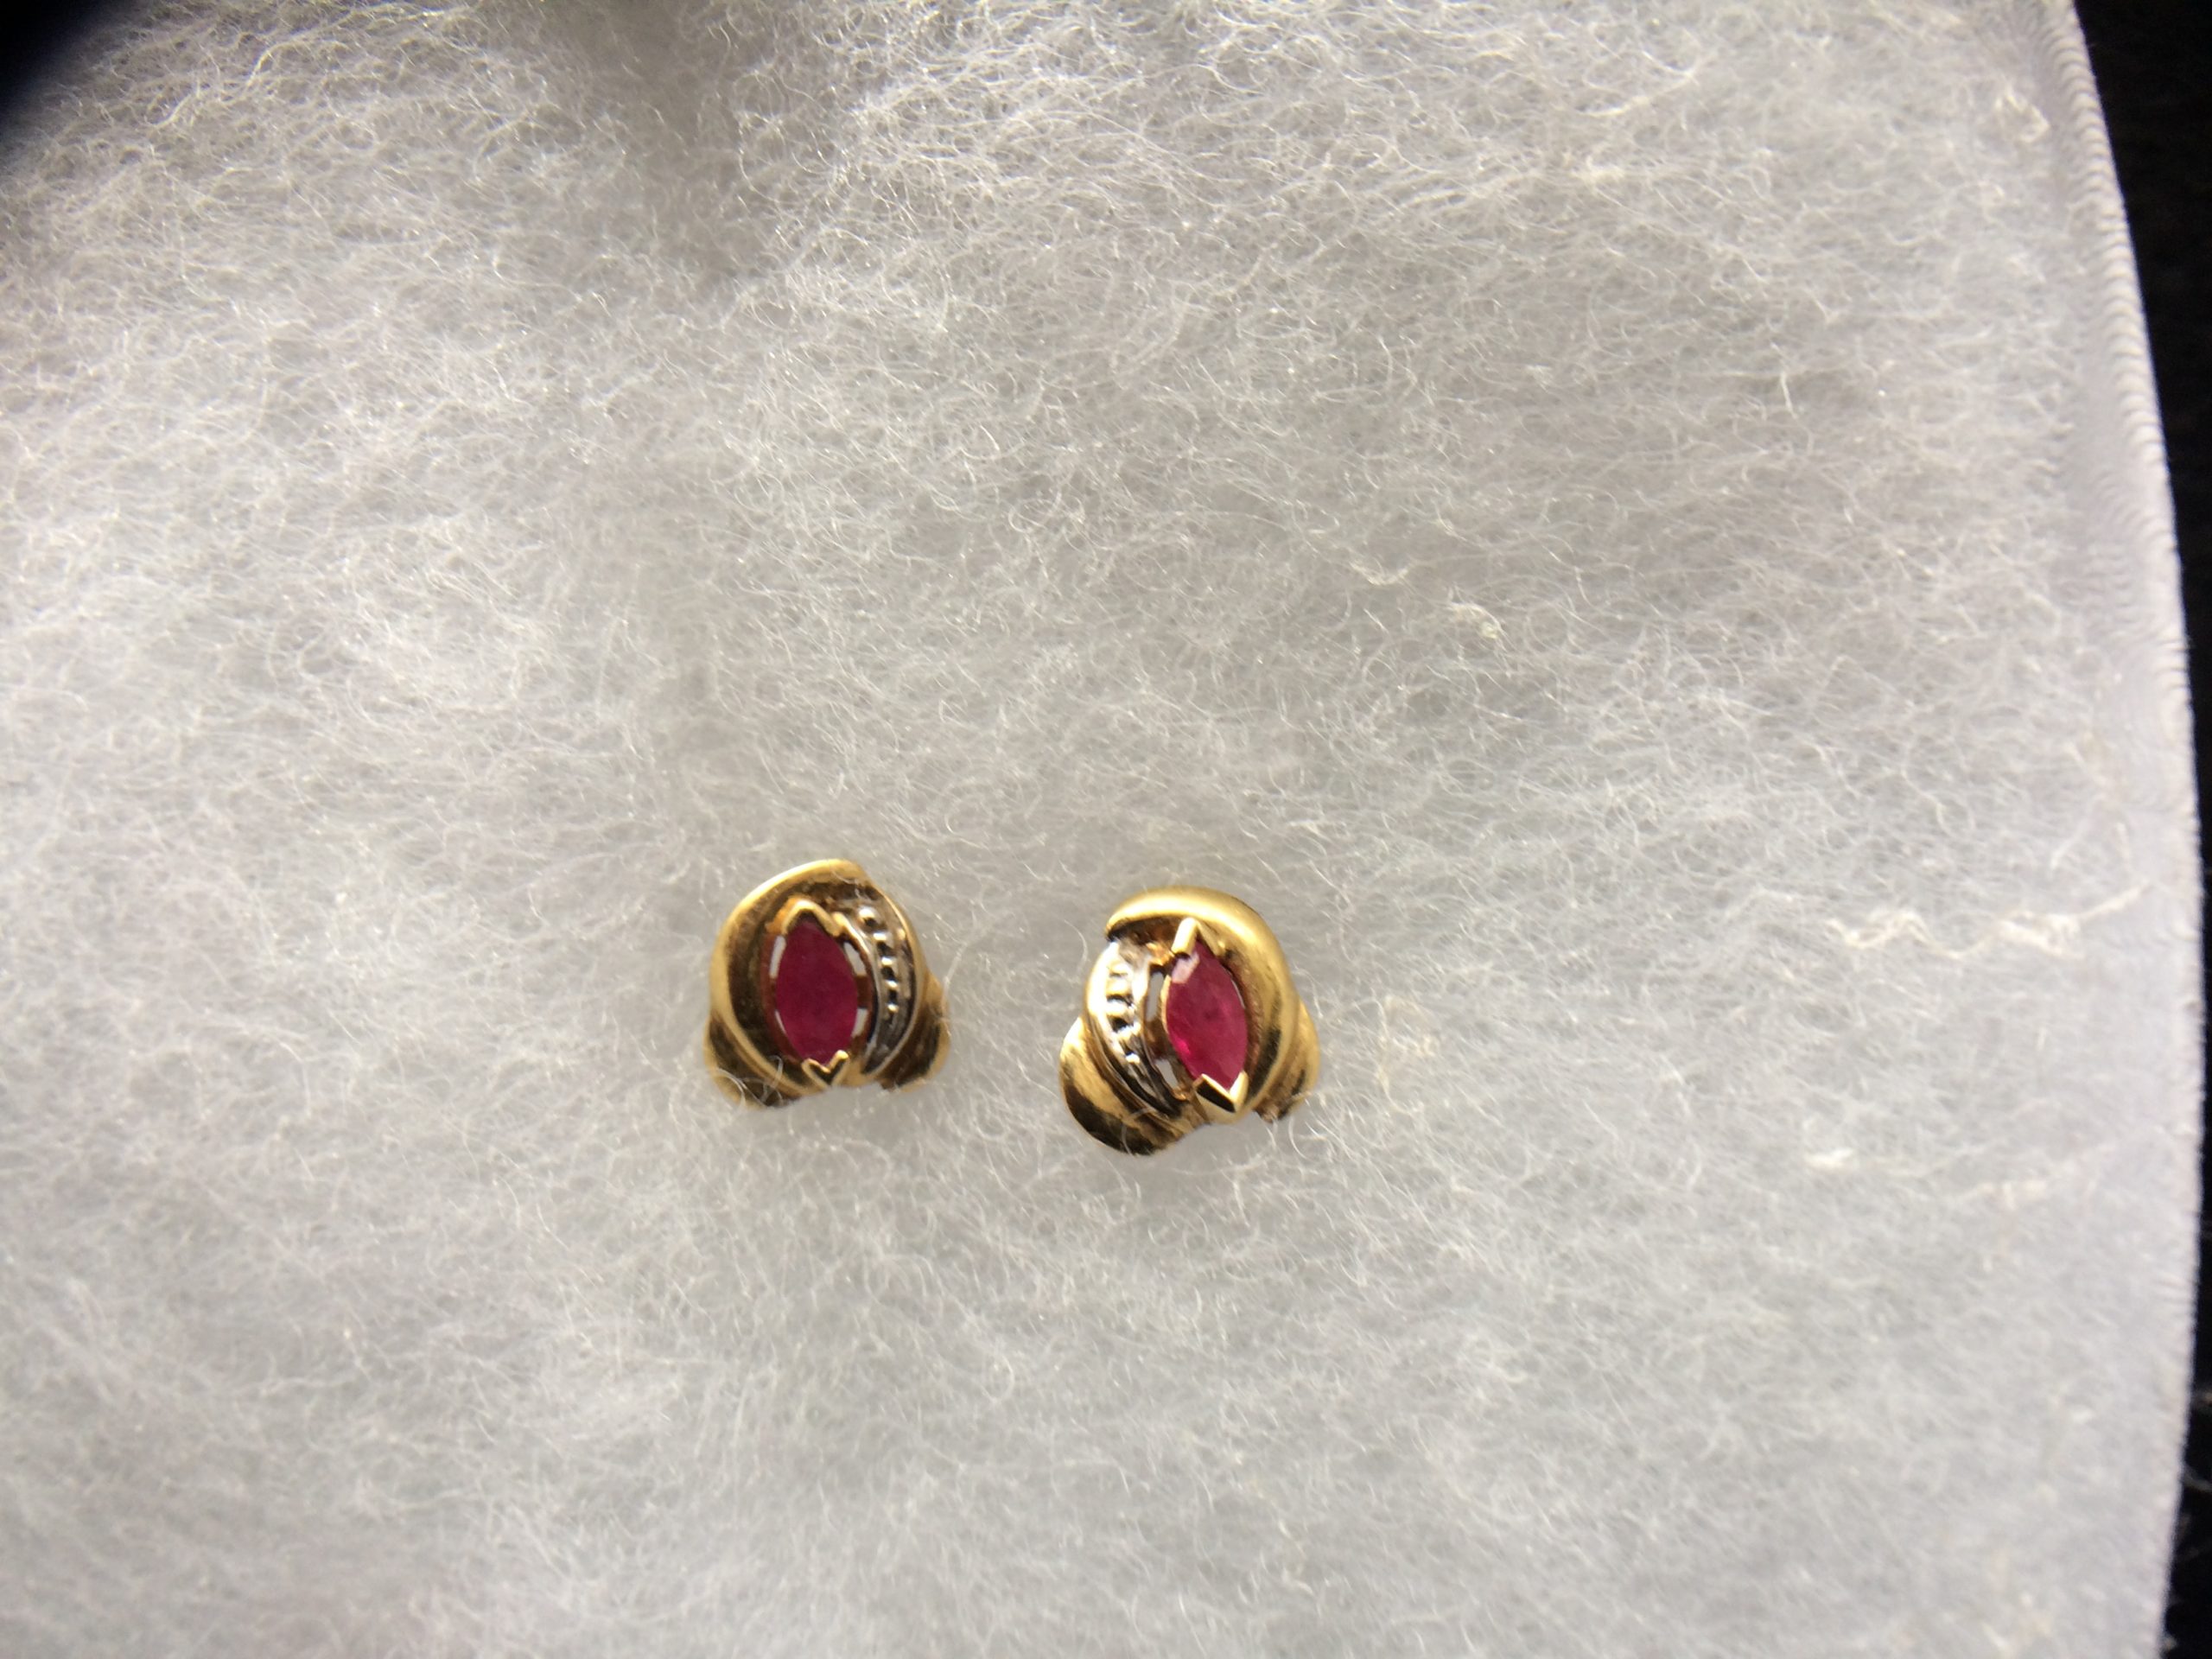 14 Karat yellow Gold with Rubies earrings - Amherst Antiques